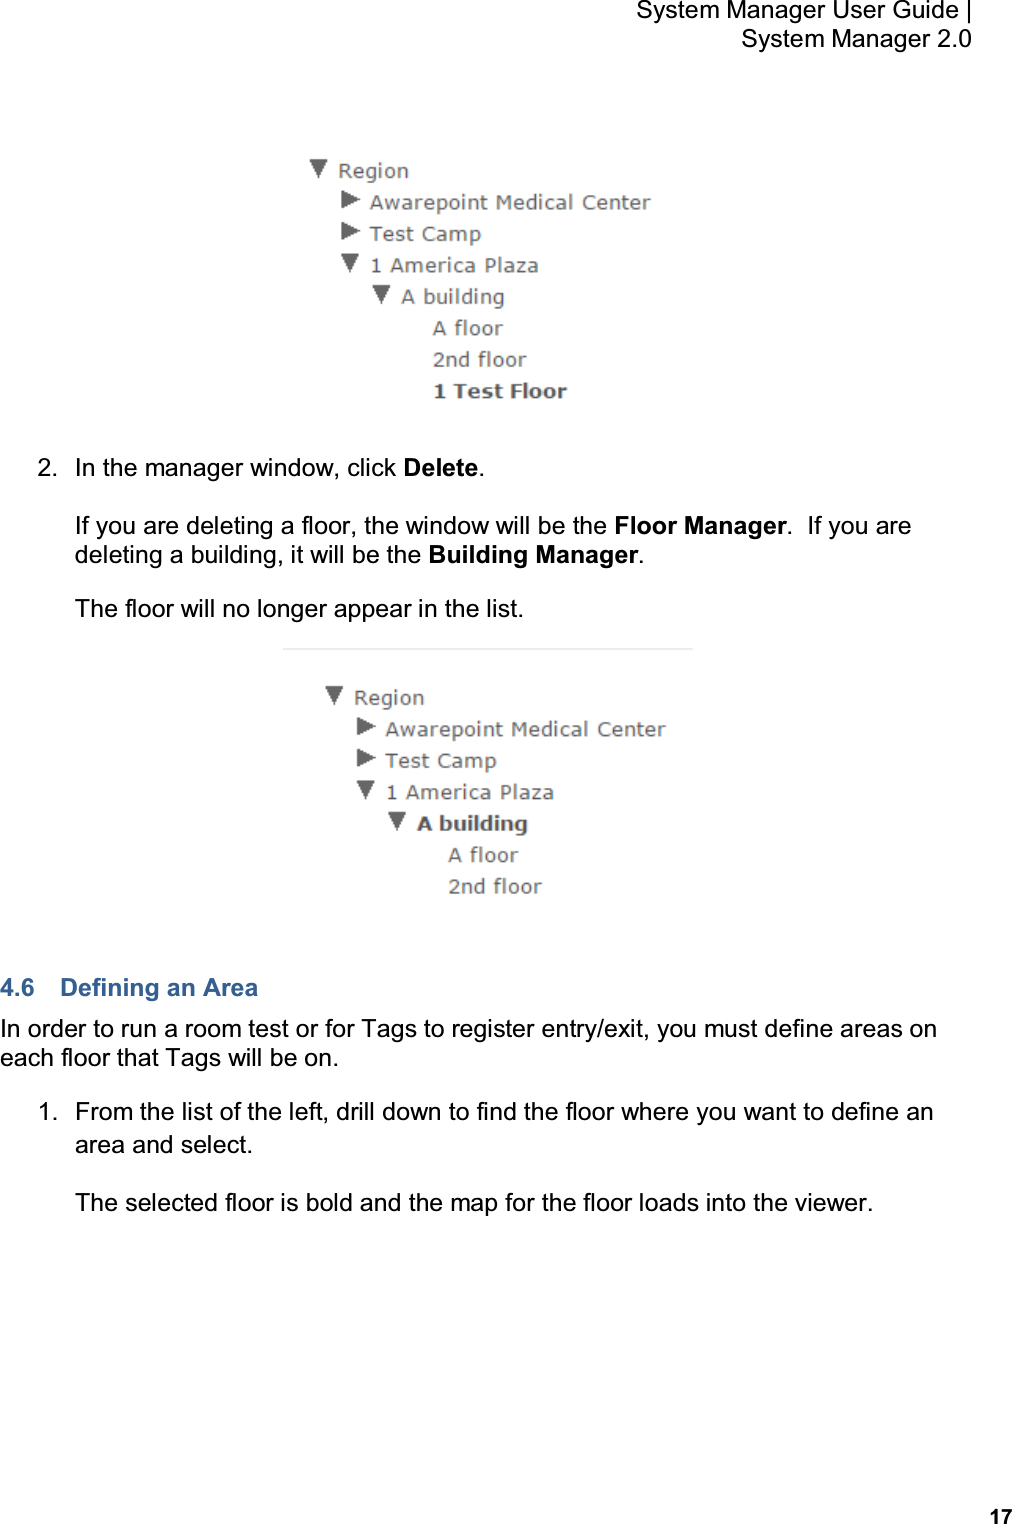           17 System Manager User Guide |  System Manager 2.0  2.  In the manager window, click Delete. If you are deleting a floor, the window will be the Floor Manager.  If you are deleting a building, it will be the Building Manager. The floor will no longer appear in the list.  4.6  Defining an Area In order to run a room test or for Tags to register entry/exit, you must define areas on each floor that Tags will be on. 1.  From the list of the left, drill down to find the floor where you want to define an area and select. The selected floor is bold and the map for the floor loads into the viewer. 